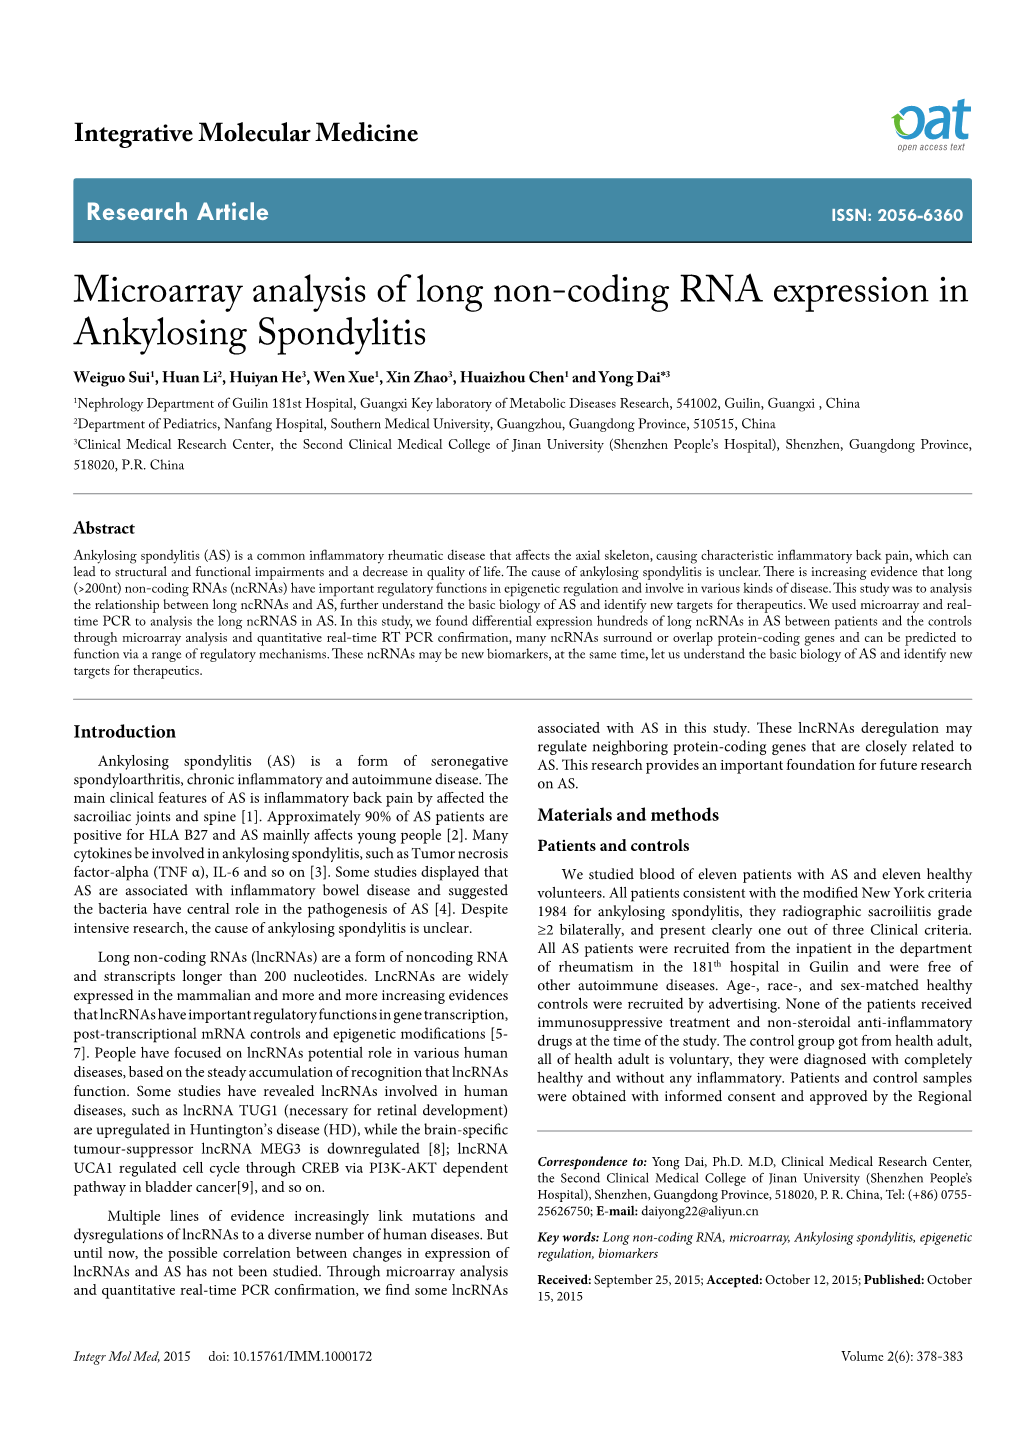 Microarray Analysis of Long Non-Coding RNA Expression In